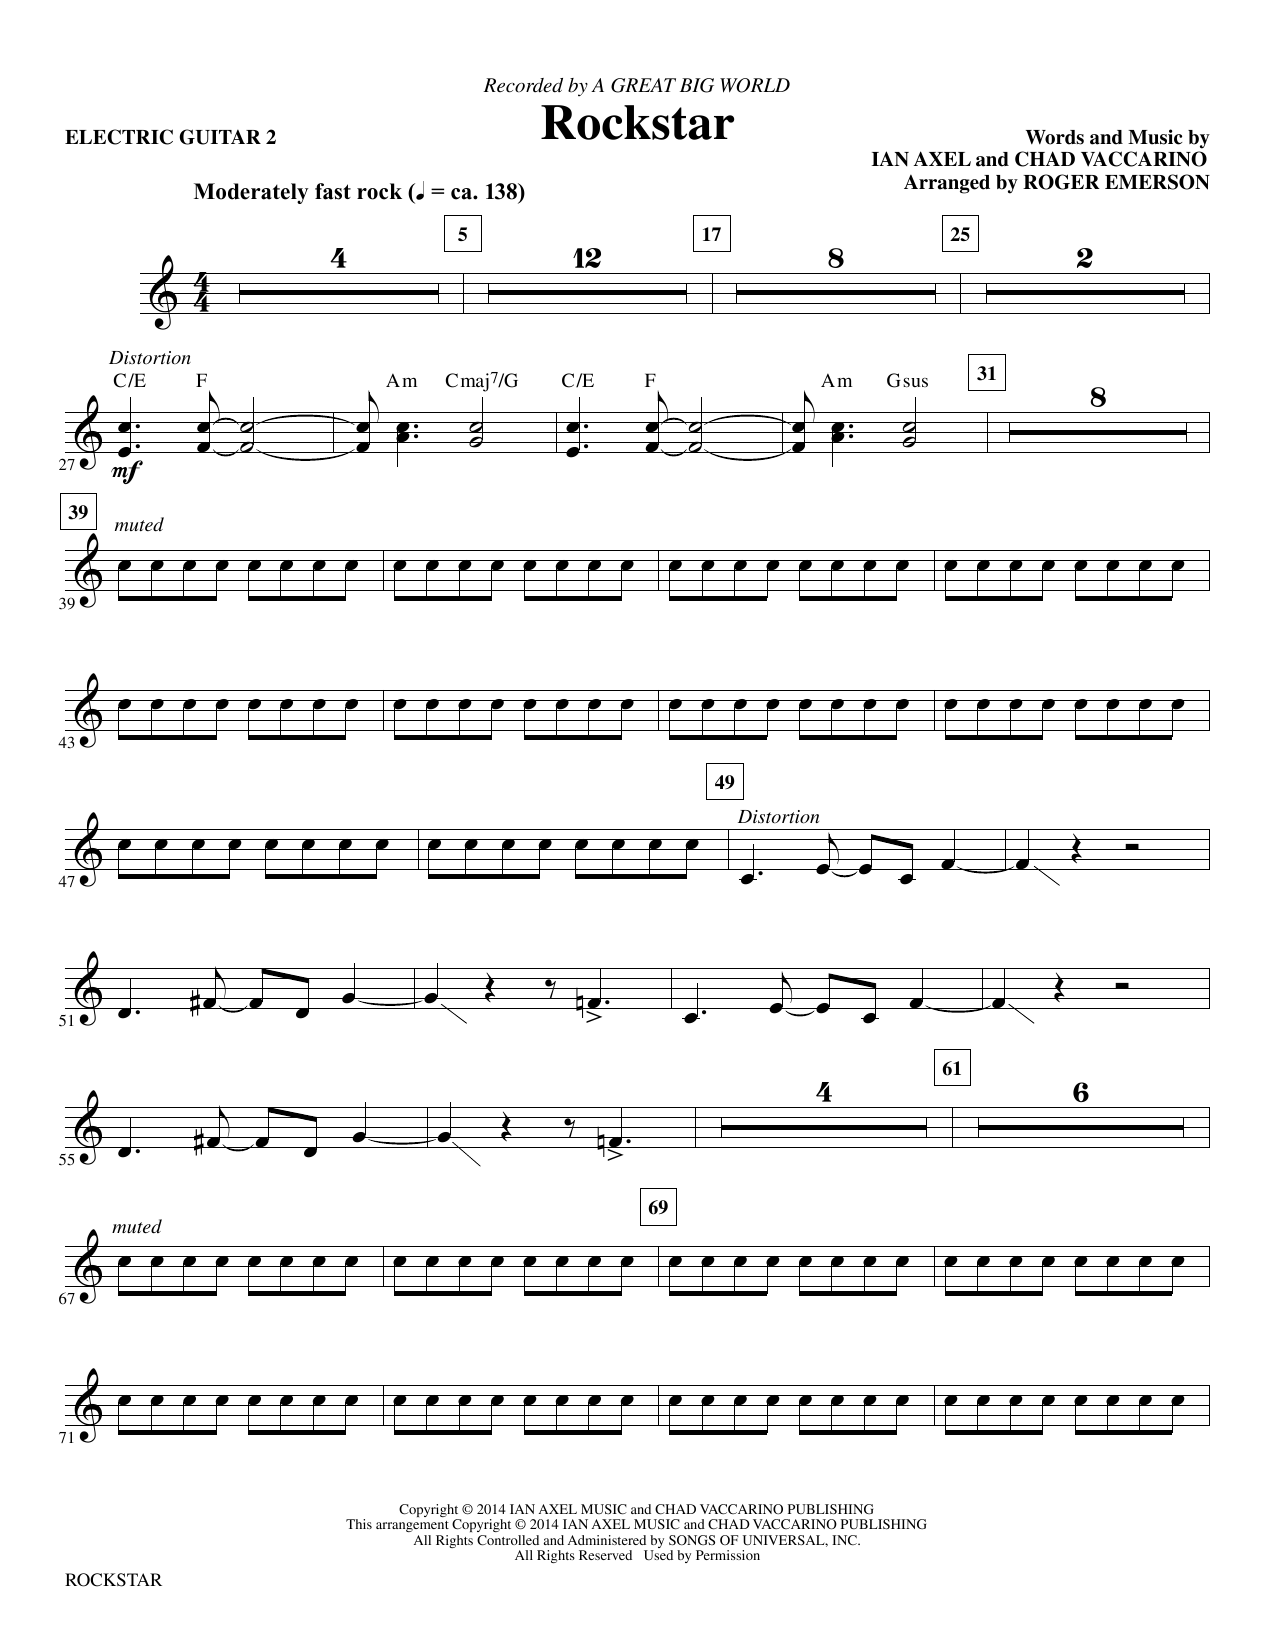 A Great Big World Rockstar (arr. Roger Emerson) - Guitar 2 sheet music notes and chords. Download Printable PDF.